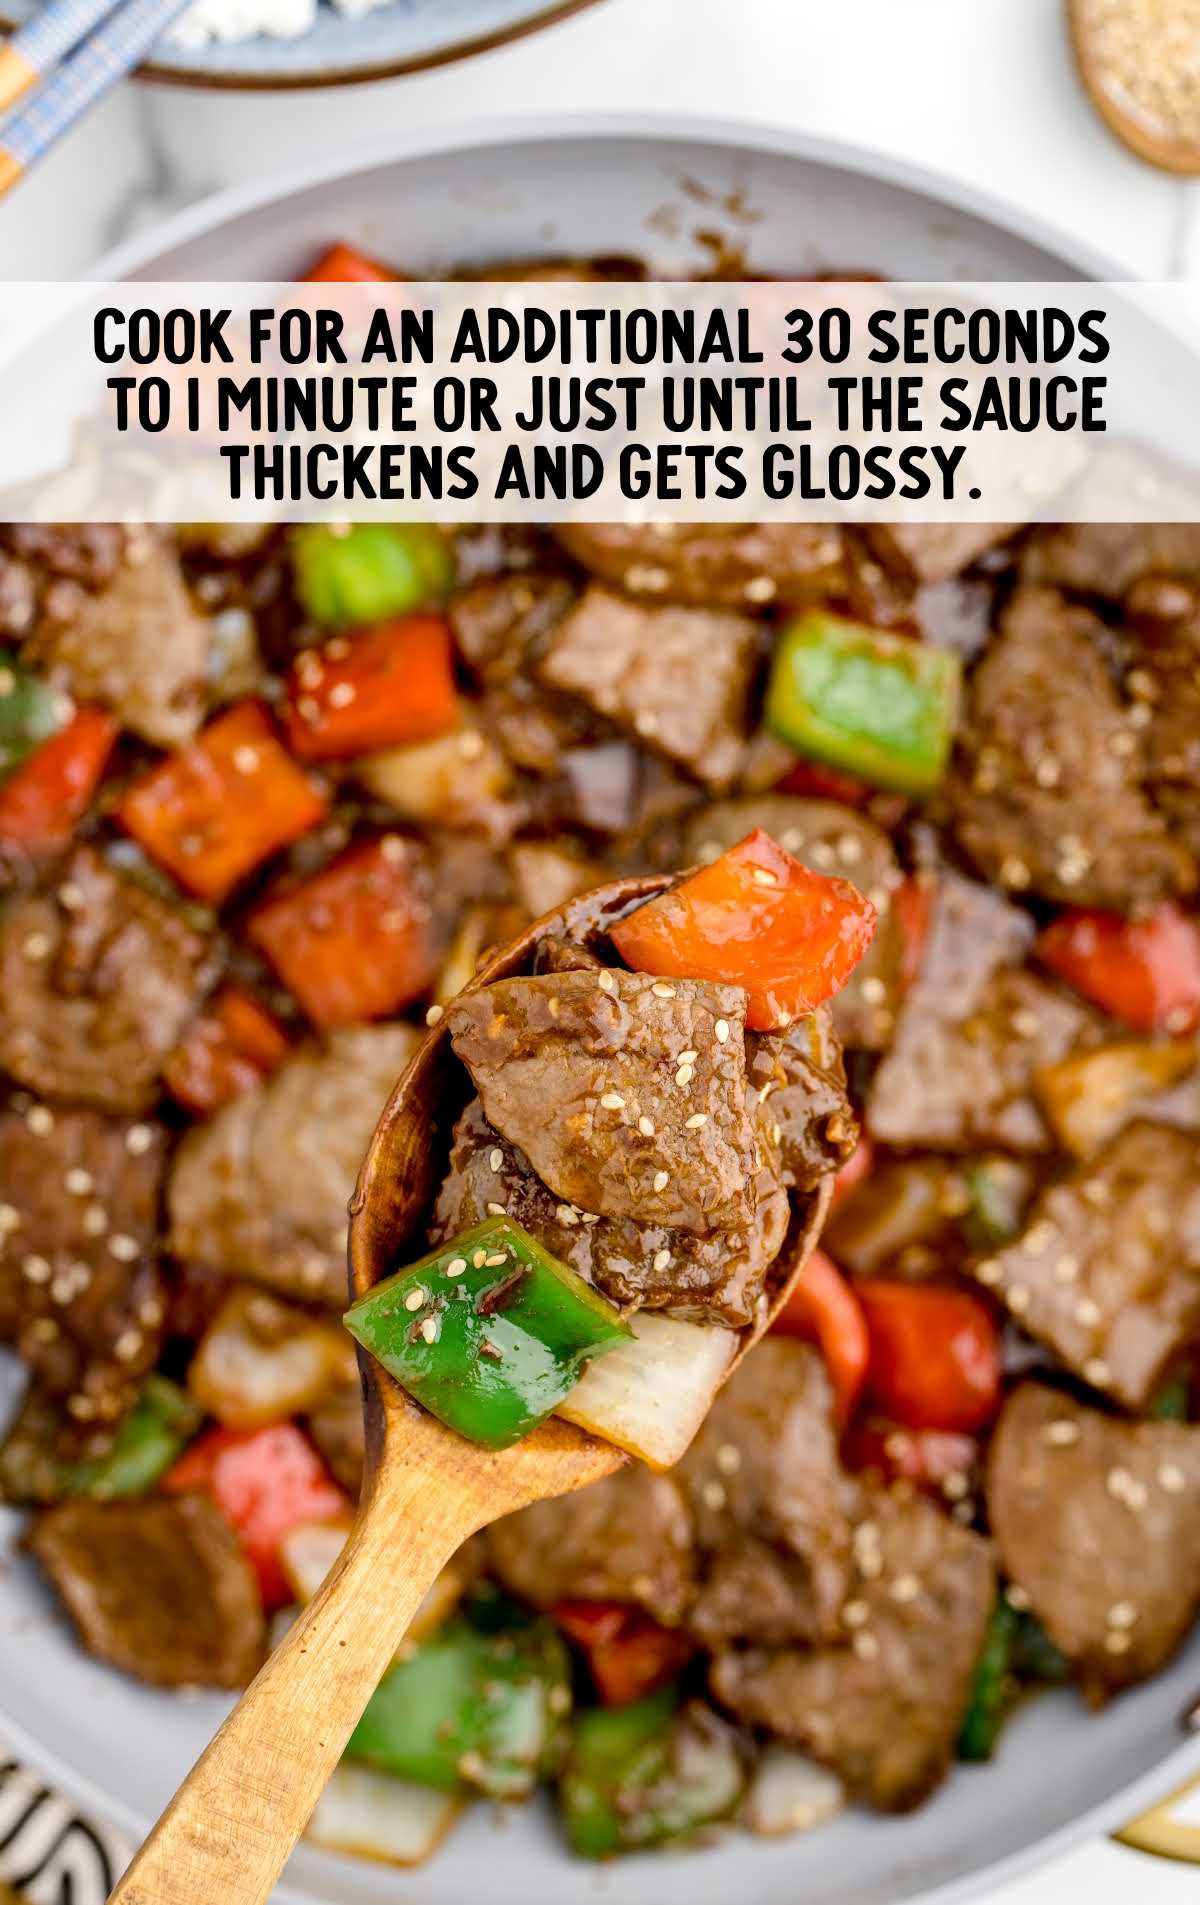 cook pepper steak for an additional 30 seconds